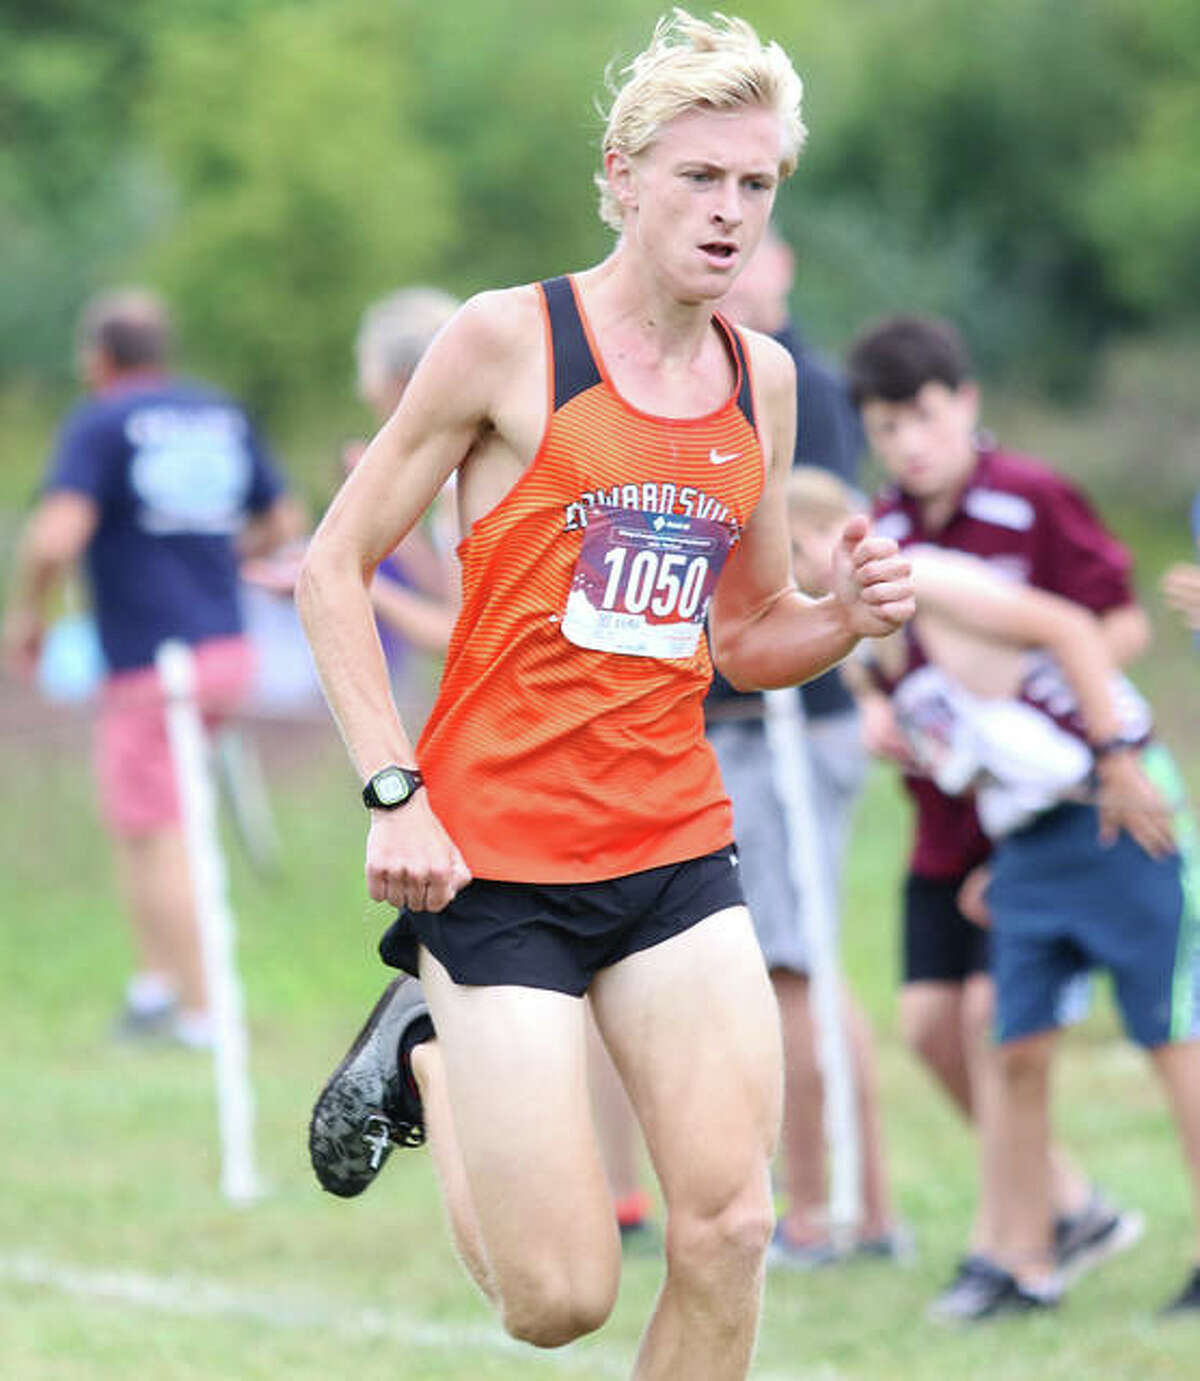 Edwardsville senior Jack Pifer pushes the the finish line in first place at the Edwardsville Invitational on Sept. 21 at SIUE. Pifer will continue his running career at Saint Louis U.